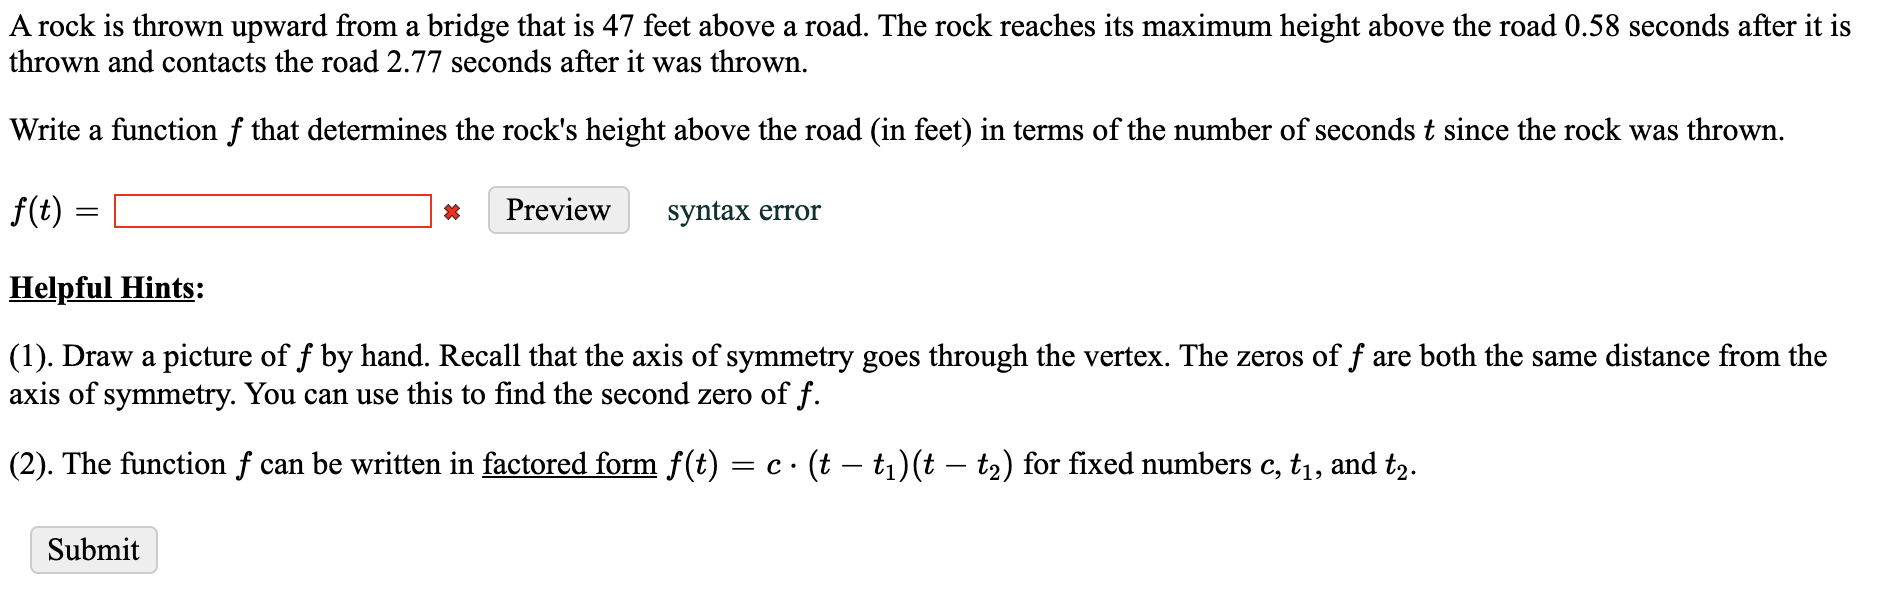 A rock is thrown upward from a bridge that is 47 feet above a road. The rock reaches its maximum height above the road 0.58 seconds after it is
thrown and contacts the road 2.77 seconds after it was thrown.
Write a function f that determines the rock's height above the road (in feet) in terms of the number of seconds t since the rock was thrown.
f(t)
Preview
syntax error
Helpful Hints:
(1). Draw a picture of f by hand. Recall that the axis of symmetry goes through the vertex. The zeros of f are both the same distance from the
axis of symmetry. You can use this to find the second zero of f.
(2). The function f can be written in factored form f(t) = c · (t – tı)(t – t2) for fixed numbers c, t1, and t2.
Submit
